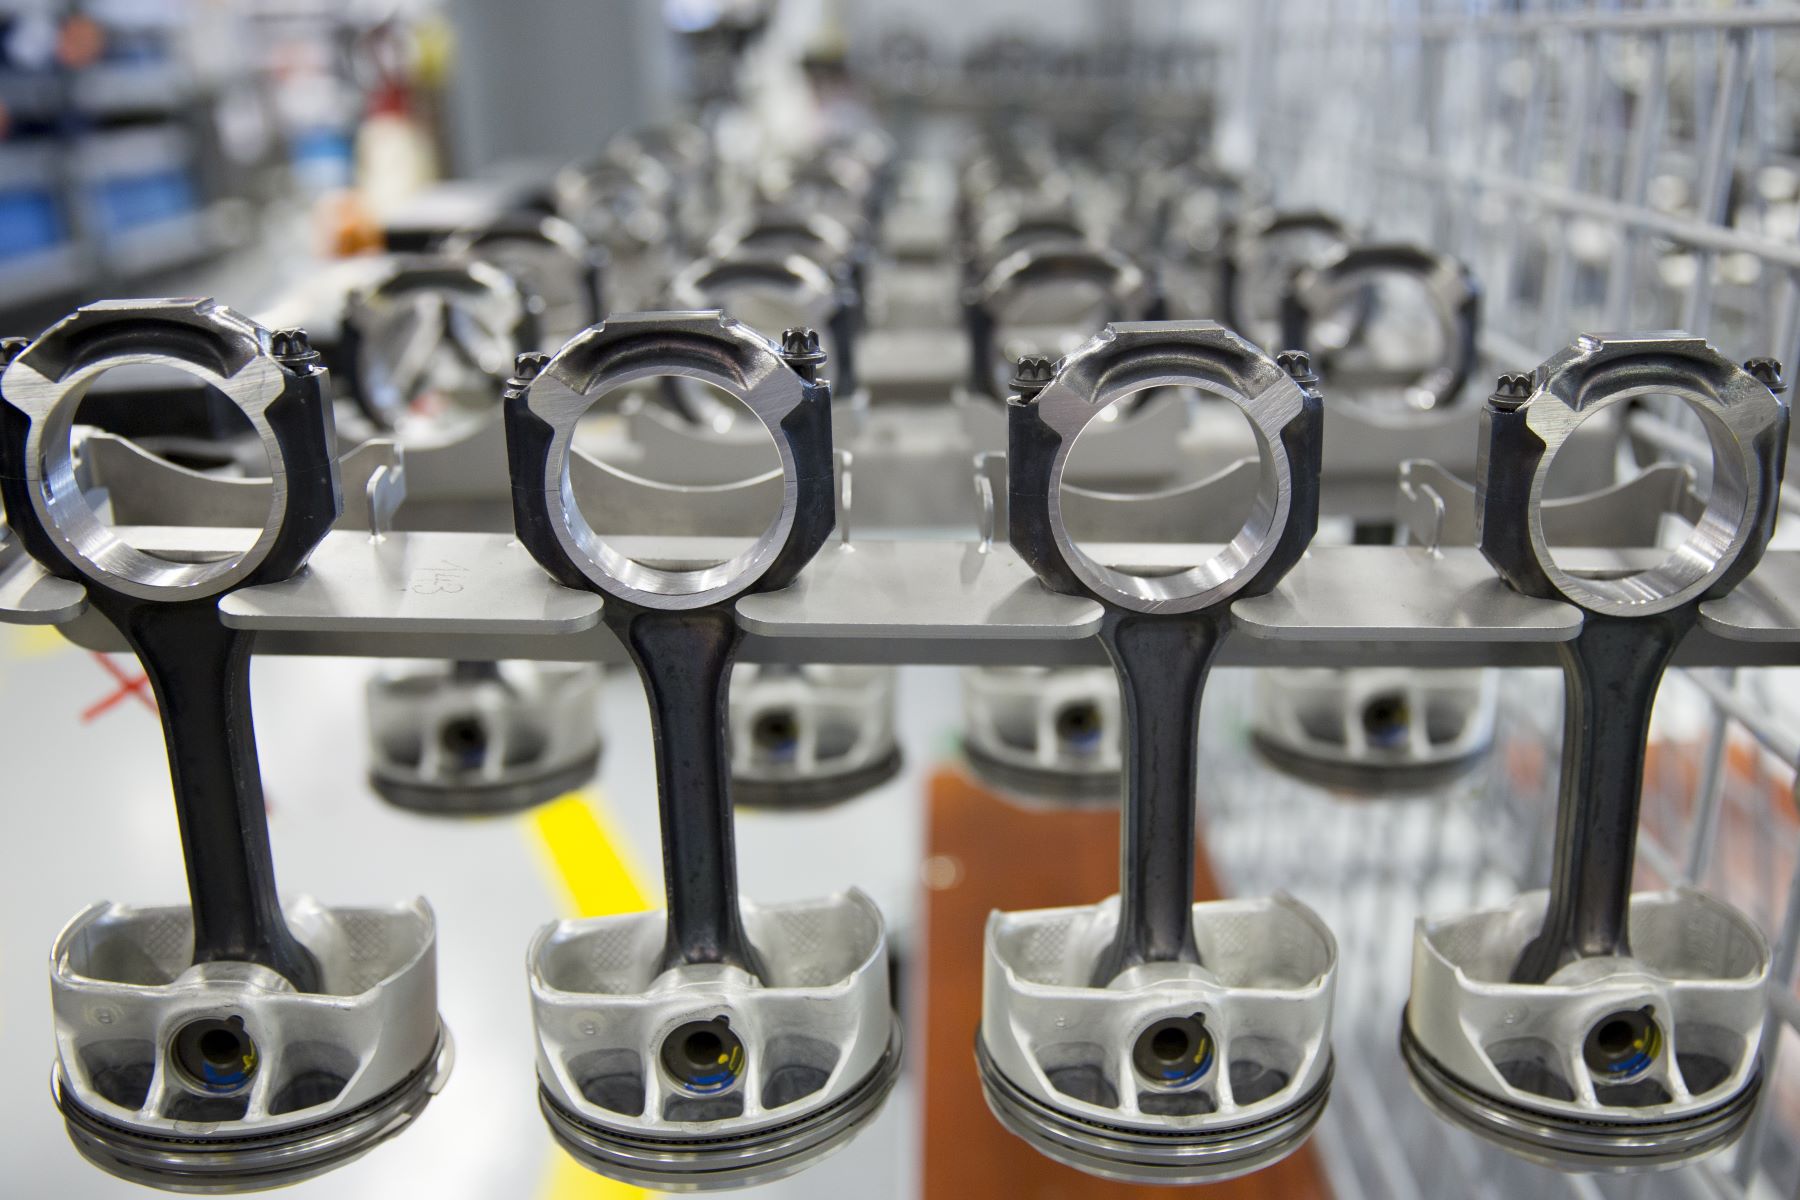 Mercedes-AMG engine piston production at a factory in Affalterbach, Baden-Württemberg, Germany